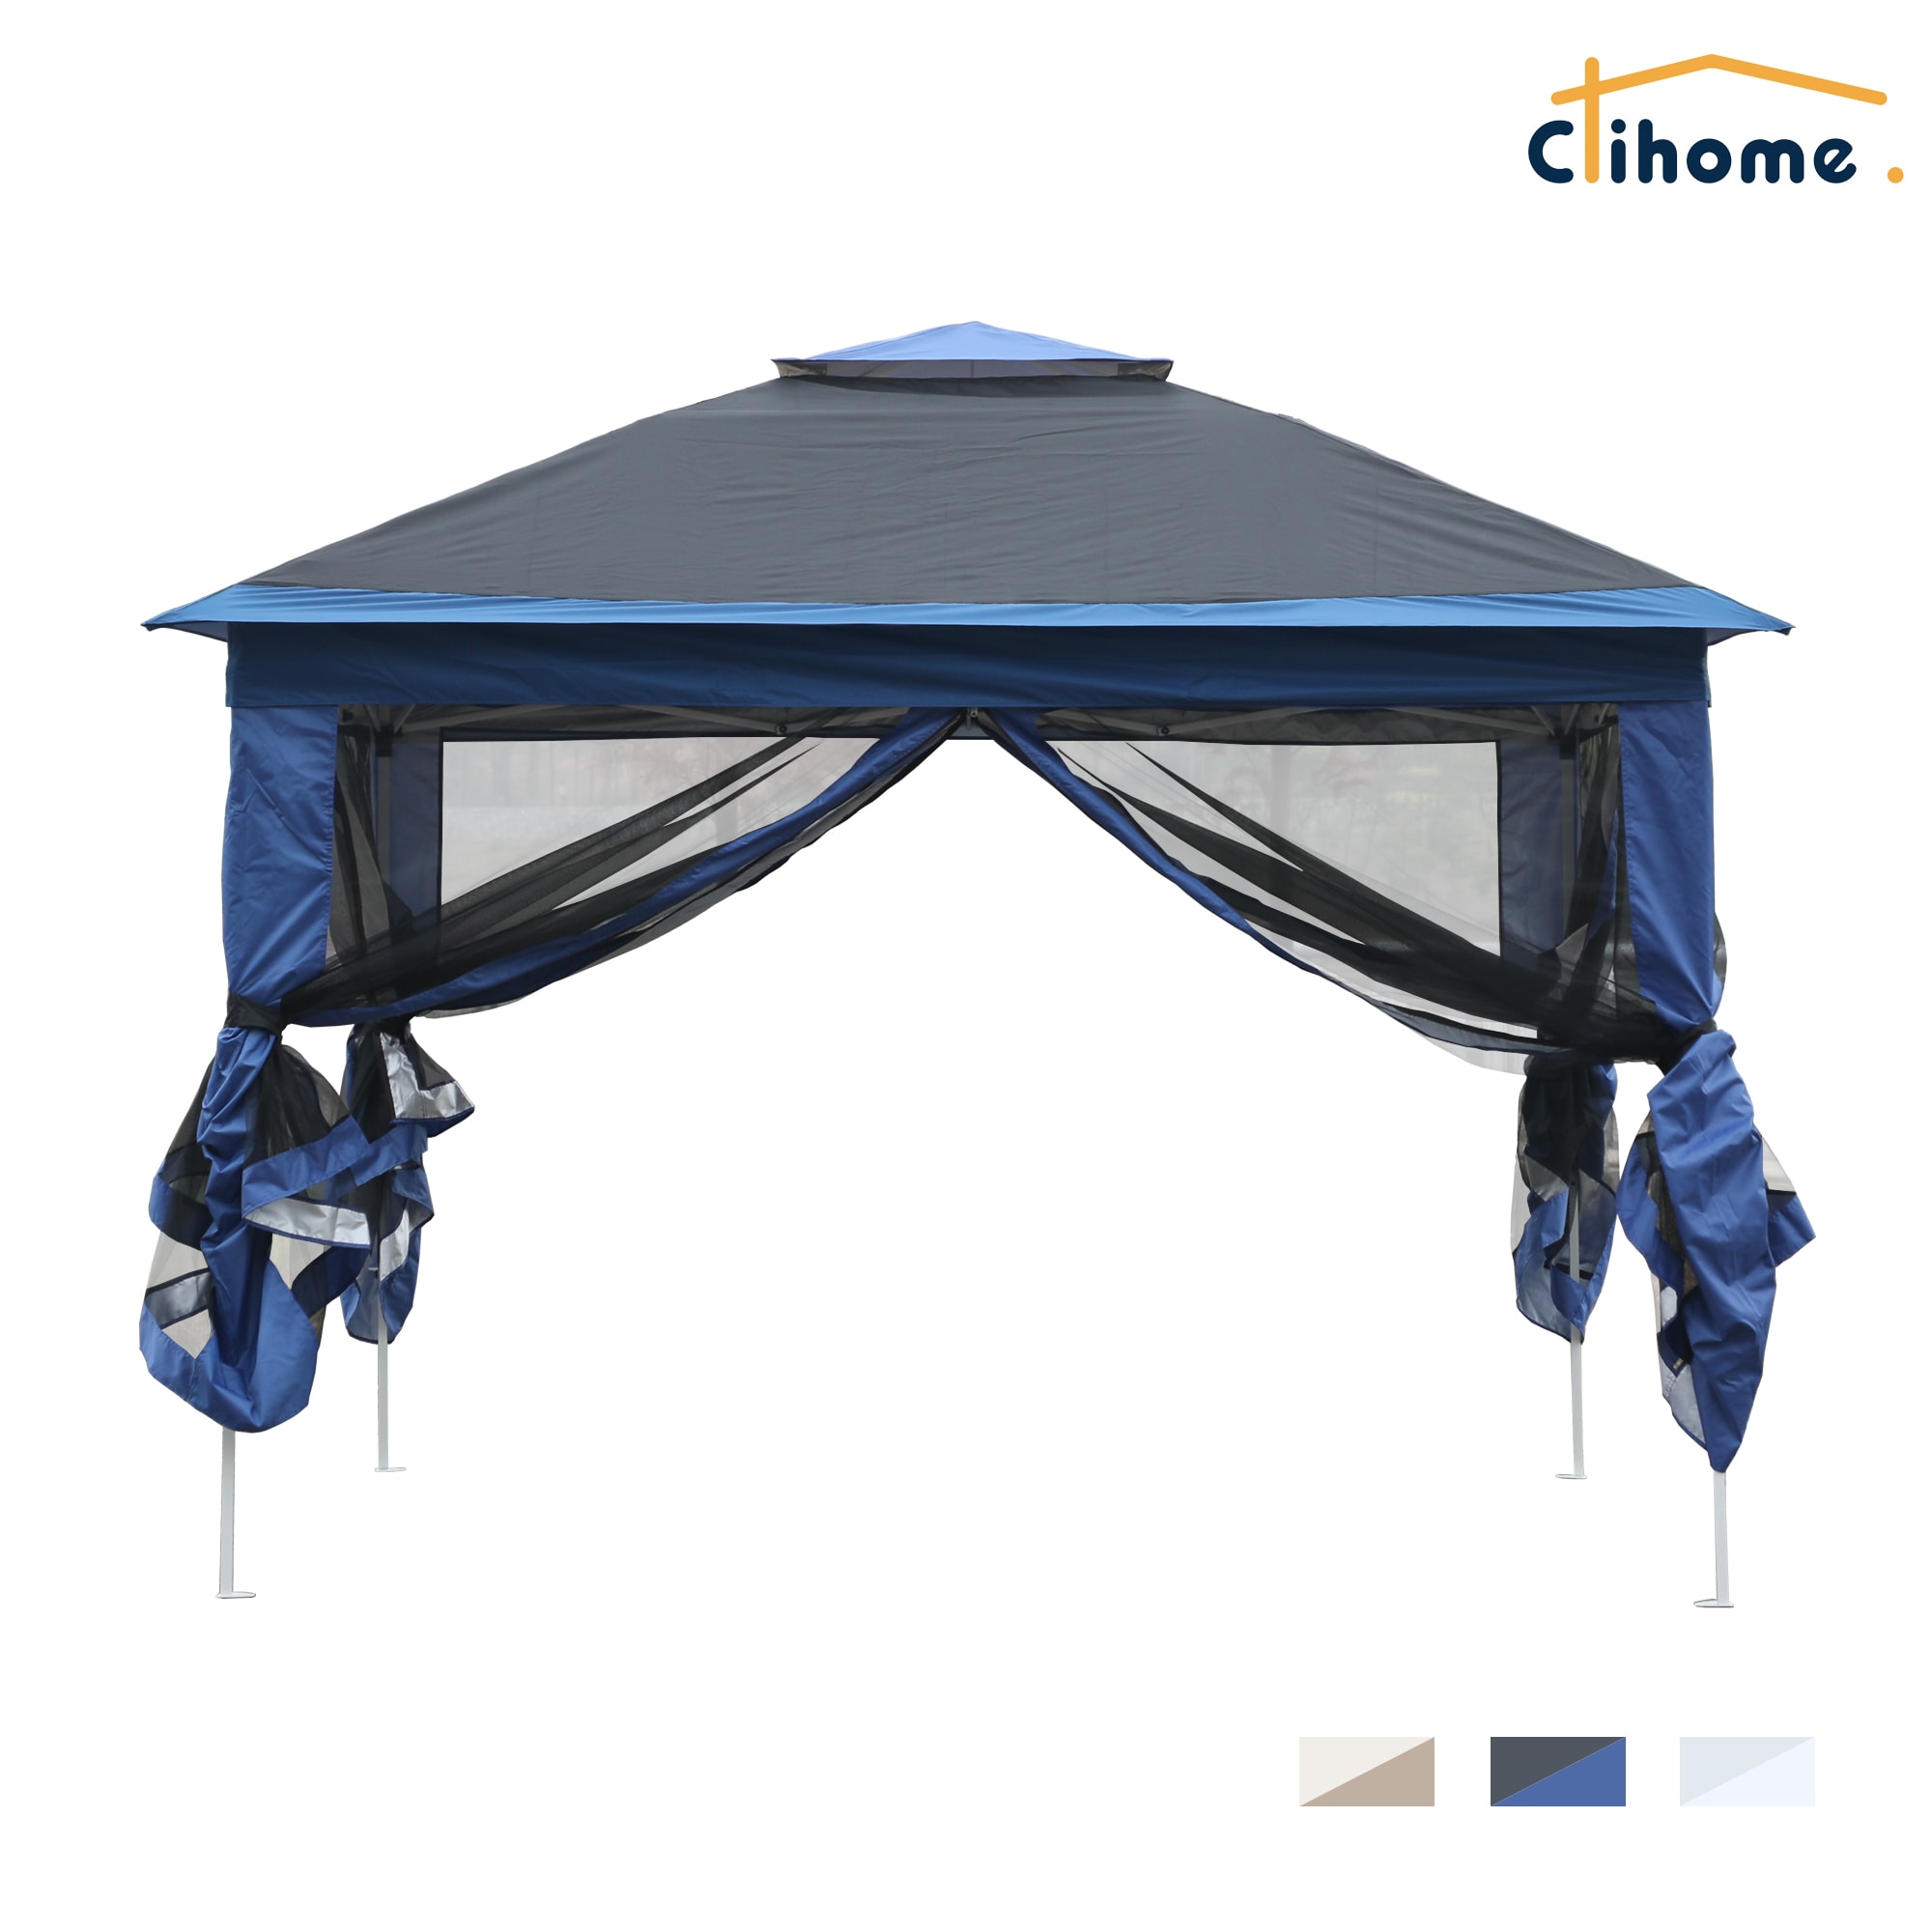 gras Buitenlander Huichelaar Clihome 10.8-ft x 10.8-ft Outdoor canopy tent Blue Metal Square Screened  Pop-up Gazebo with Steel Roof in the Gazebos department at Lowes.com